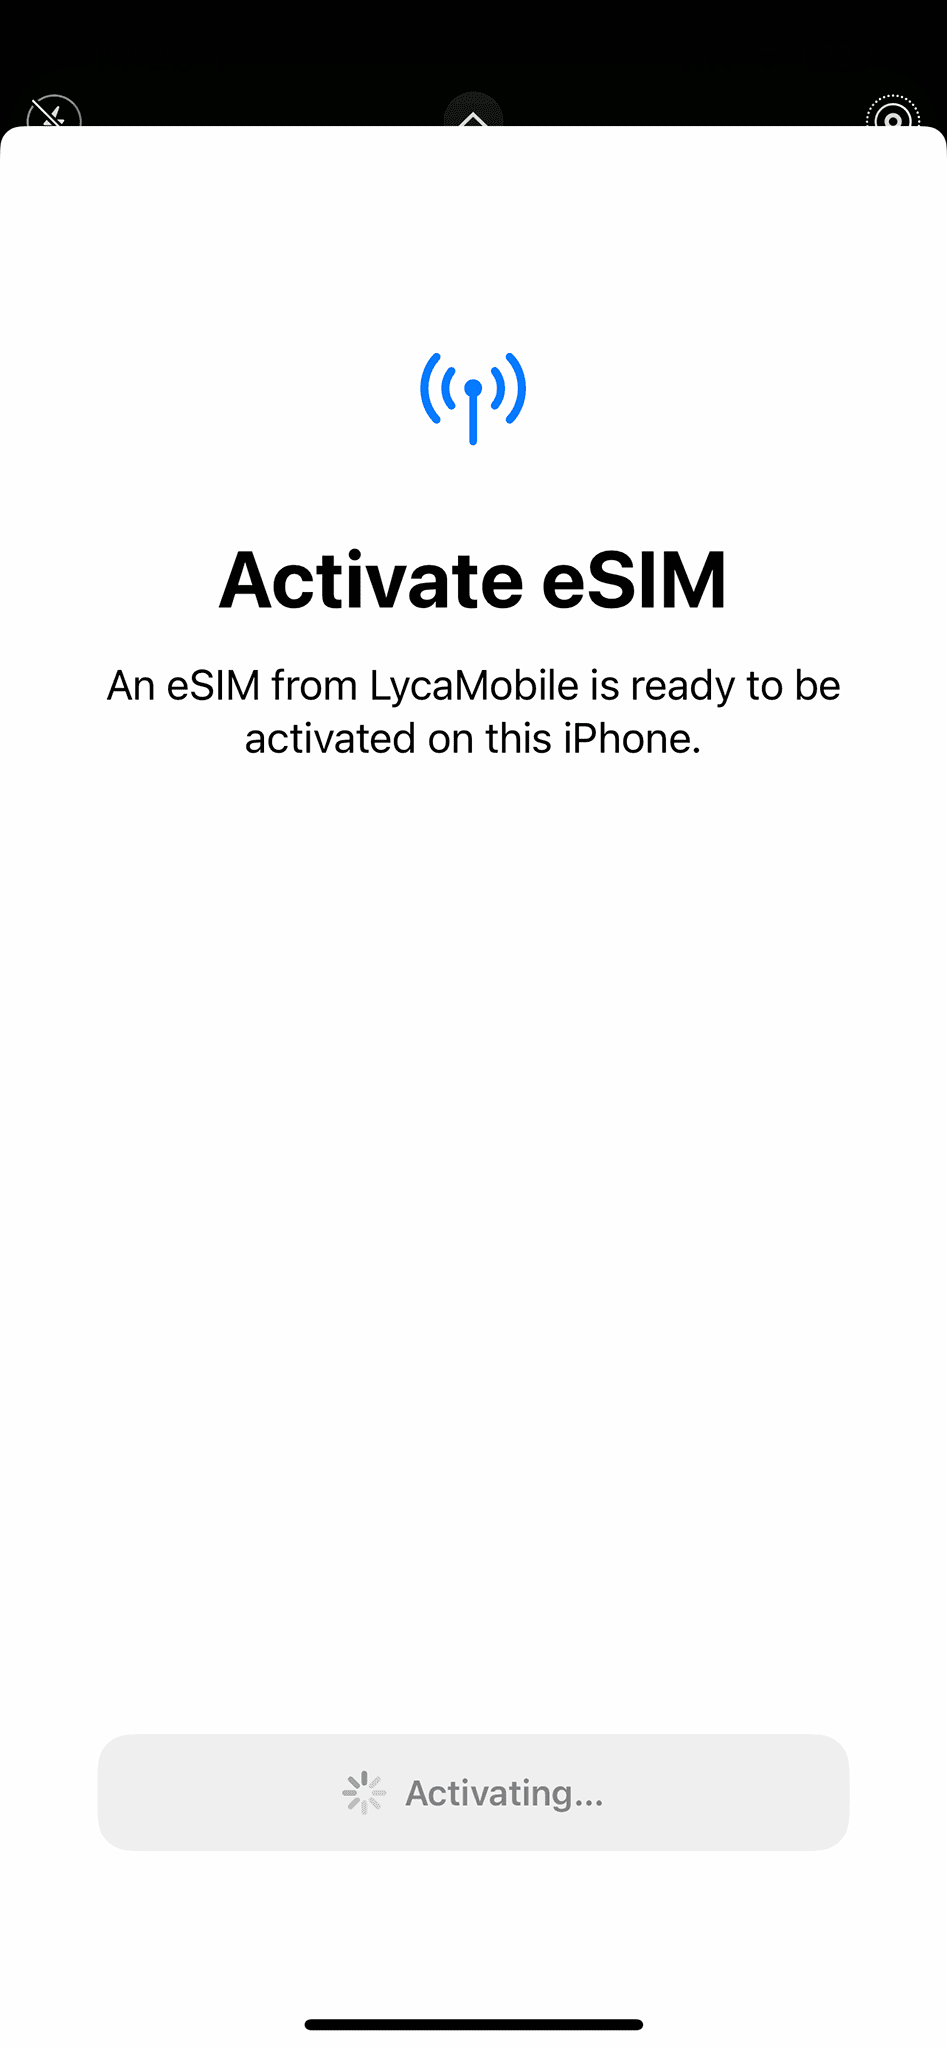 Another try activating eSIM on LycaMobile